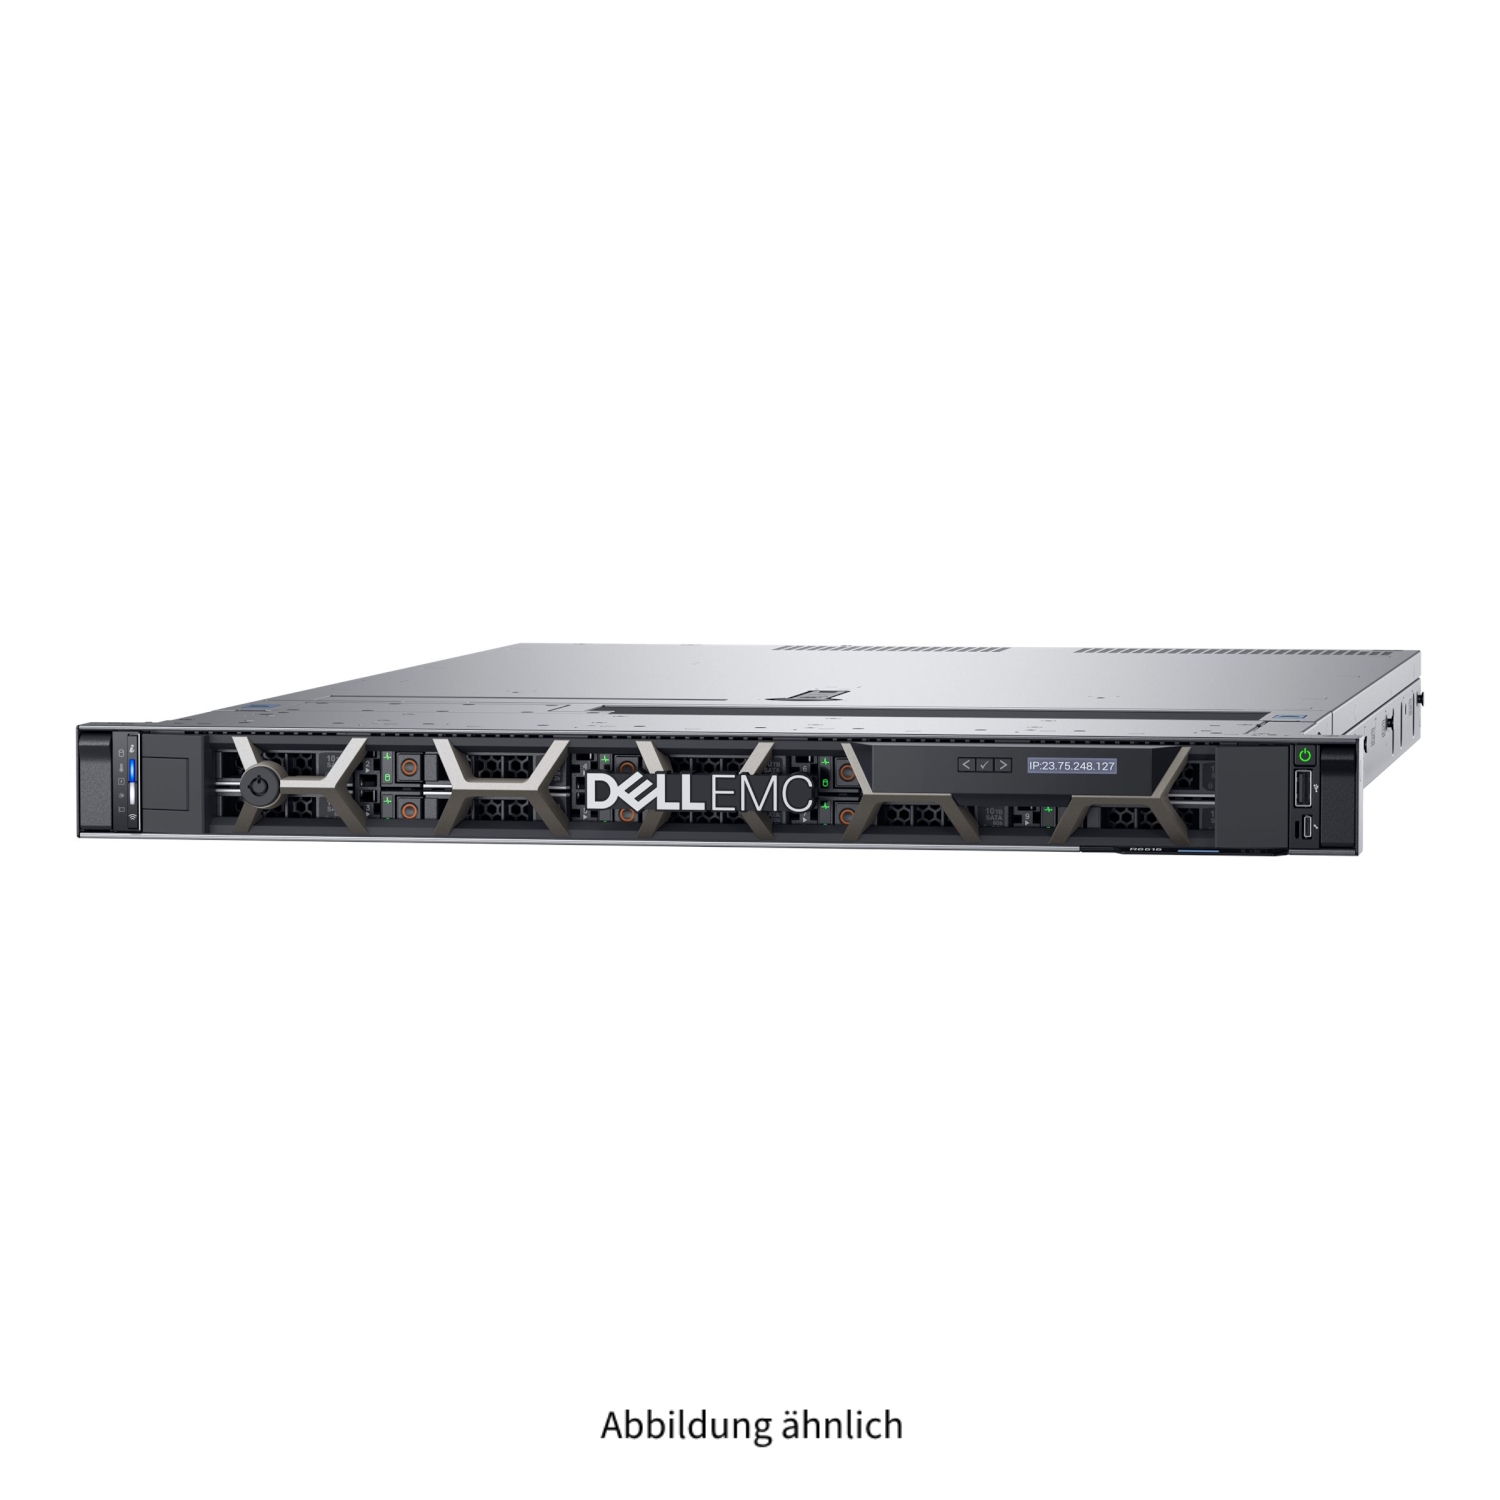 Dell R6515 8xSFF 1P Epyc 7282 2.80GHz 16C 16GB H730p 1x 480GB SATA SSD 1x 550W Rack Kit - Next Business Day Support 04.2026